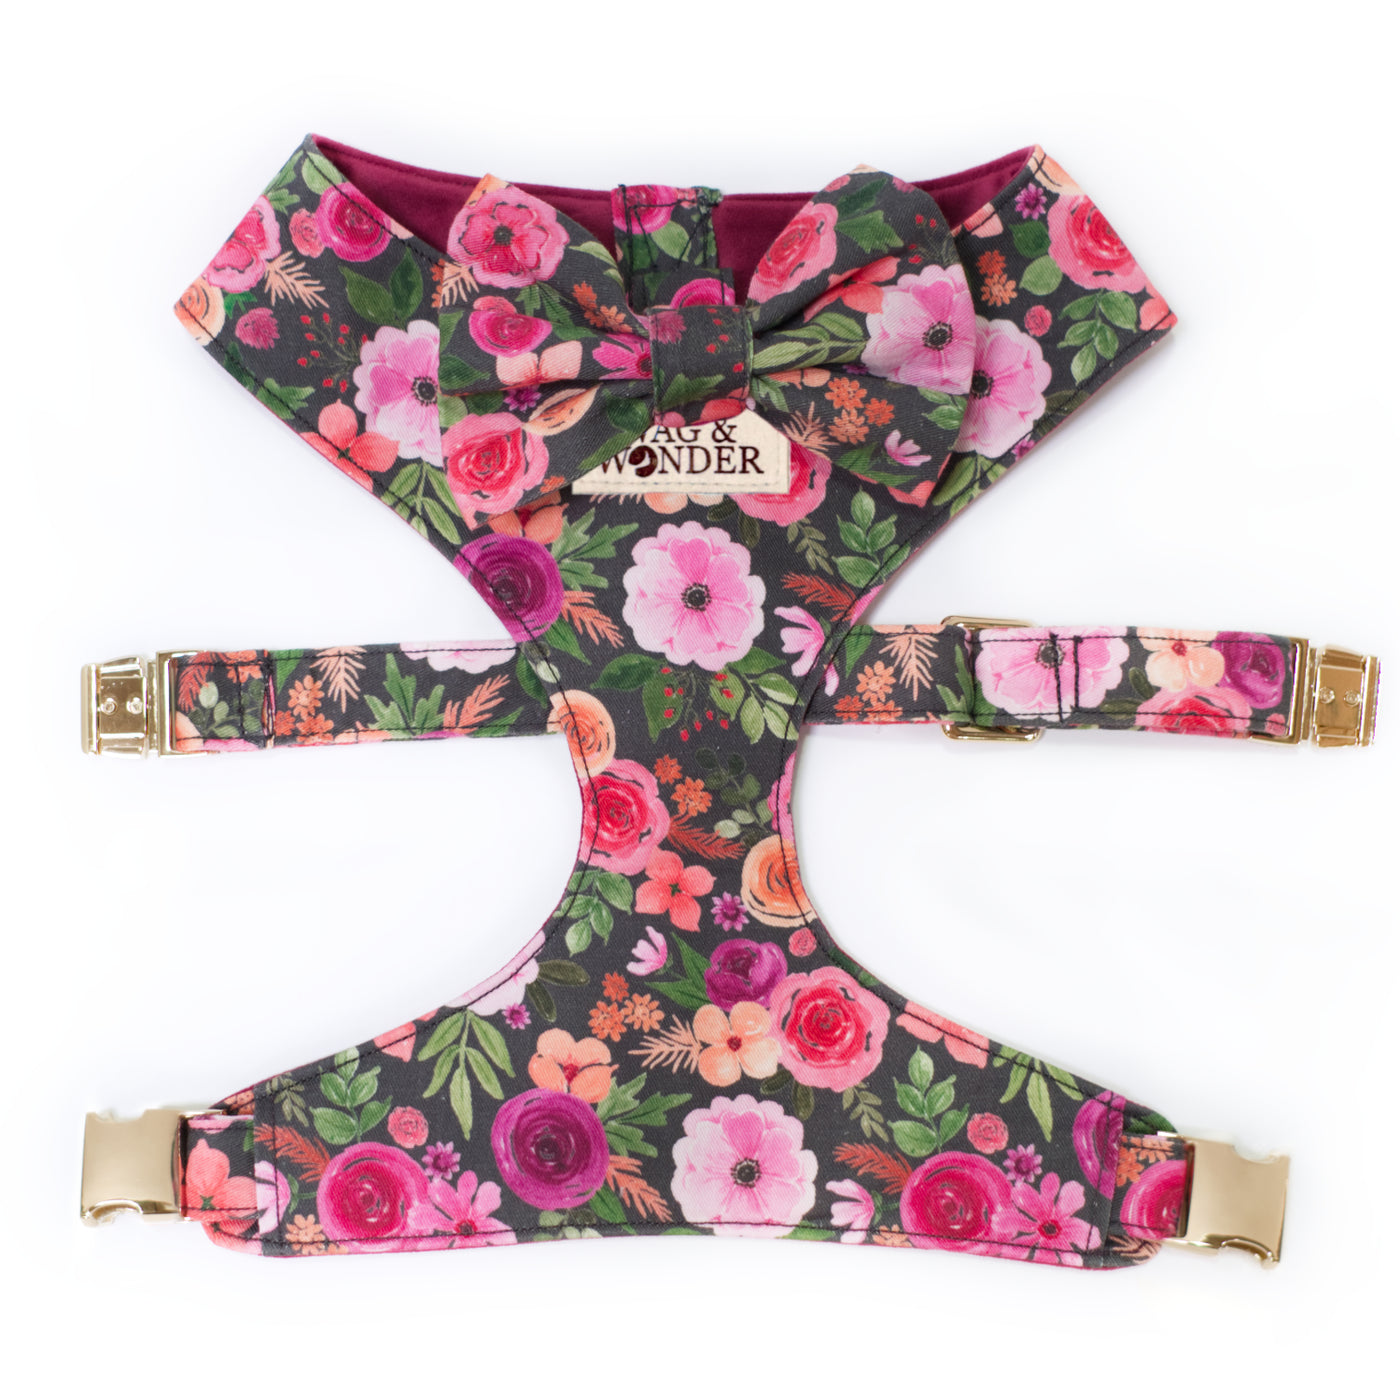 Pink, purple & orange floral reversible dog harness with gold hardware and classic dog bow tie